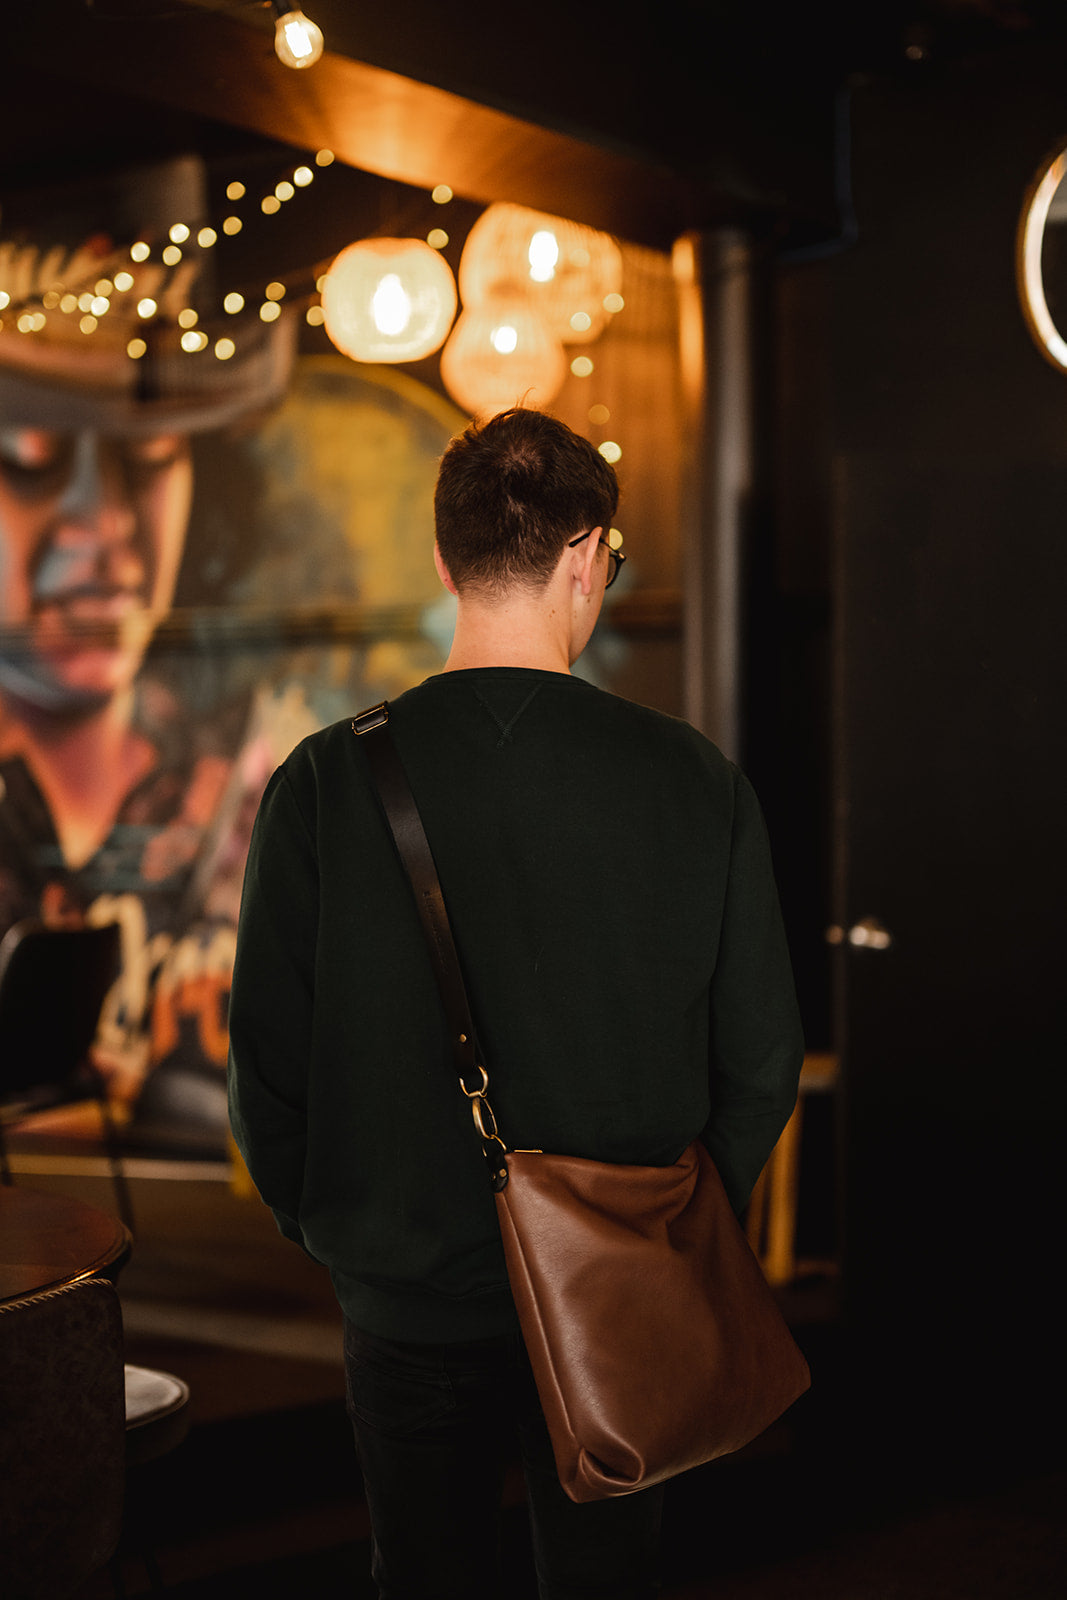 Man standing in low lit room with mural of a face on the wall. His back is turned and he is wearing a tan leather crossbody bag with black strap. The bag is the Ella Jackson Tan Leather Carryall